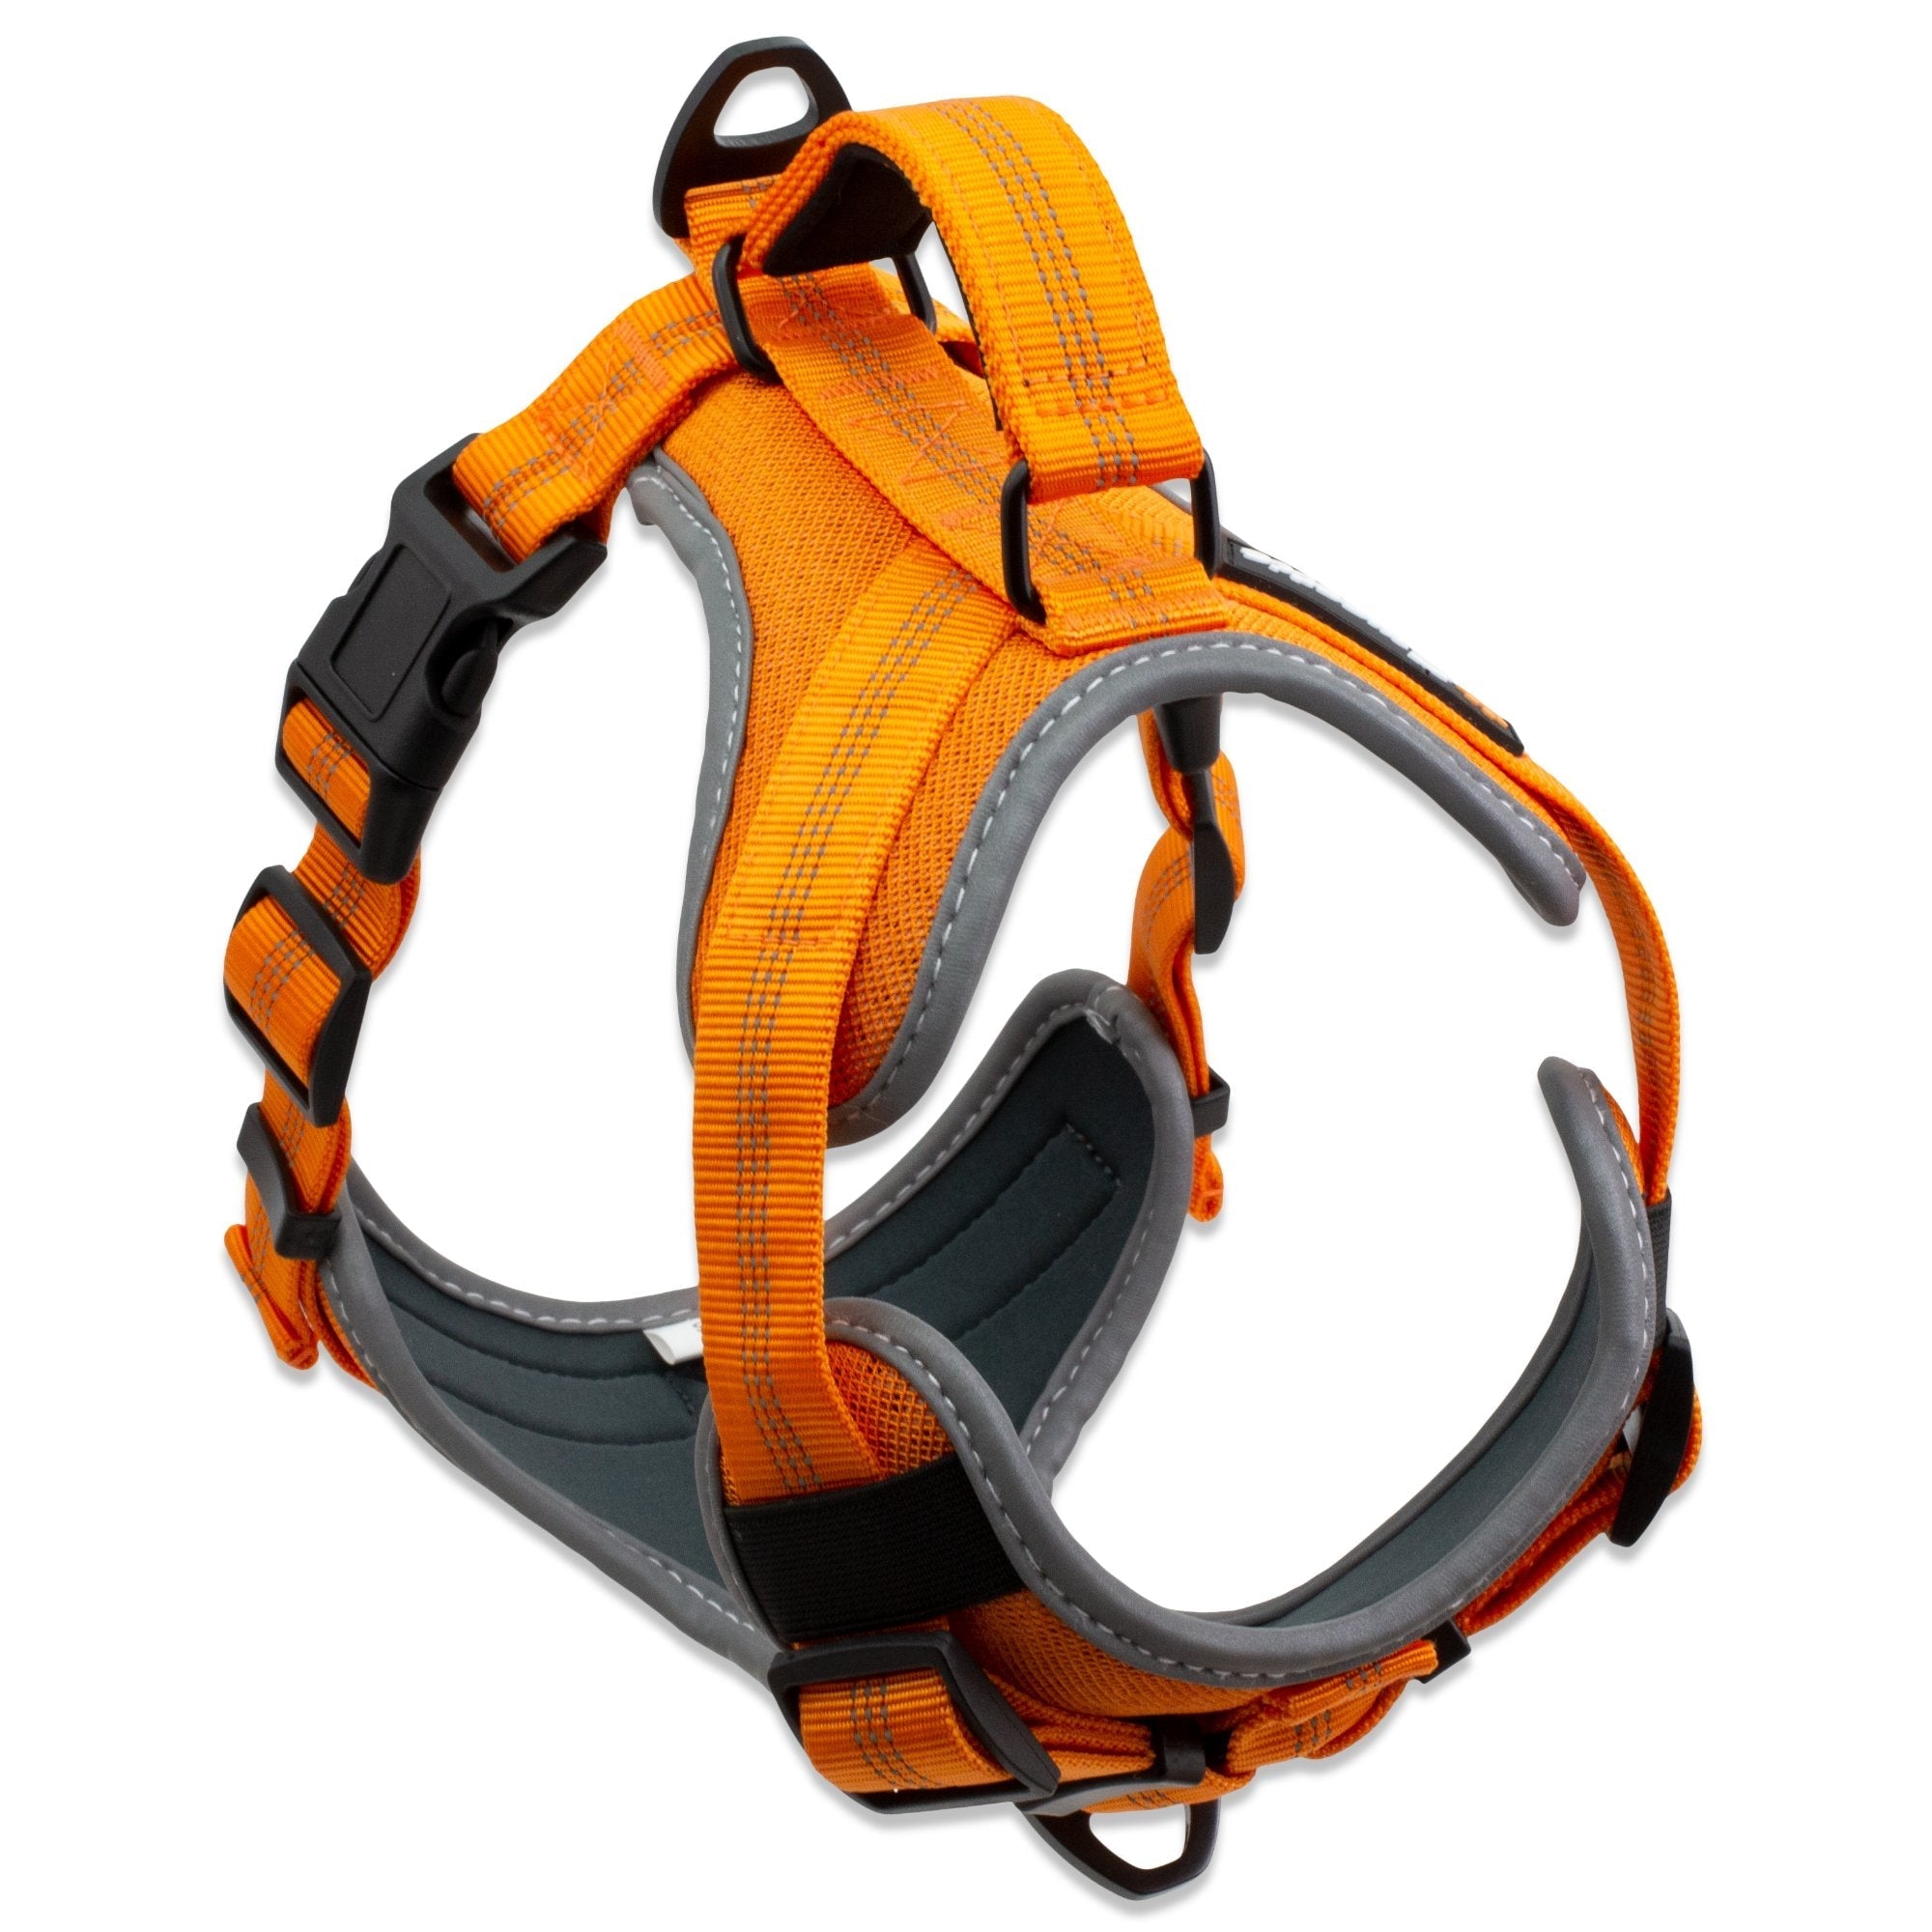 Adjustable No-Pull Dog Harness with Padded Control Handle - Sweetie